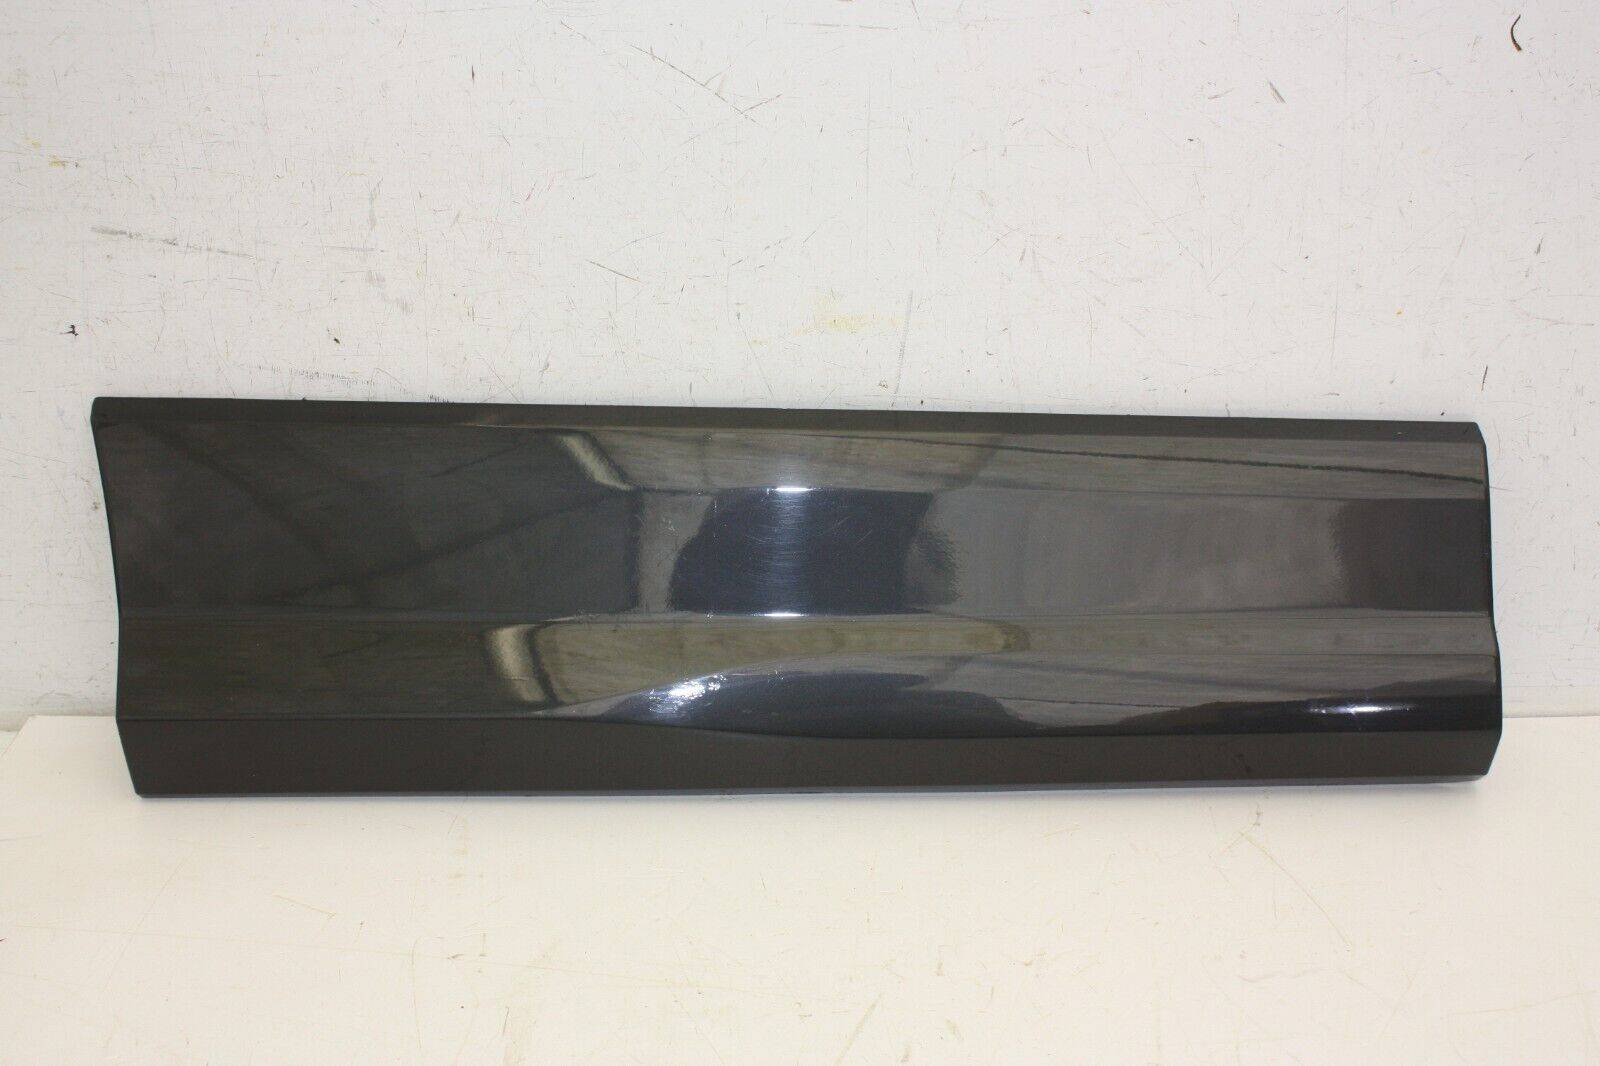 Audi Q2 Rear Right Door Moulding 2016 TO 2021 81A853970B Genuine 176288374631